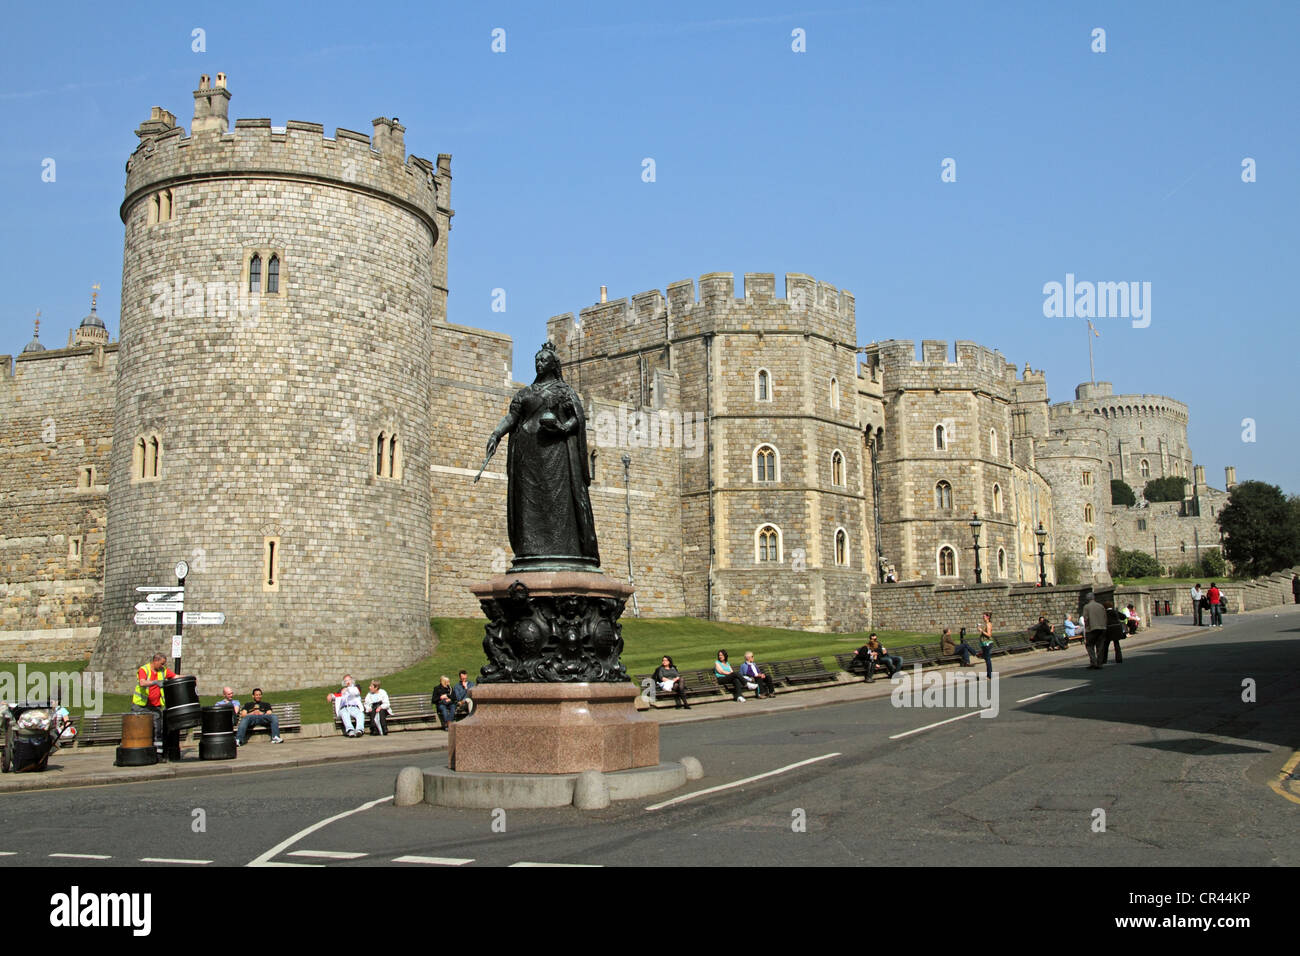 Windsor Castle, Berkshire, England. The Queen Victoria Statue designed by Sir Edgar Boehm and erected in 1887 Stock Photo